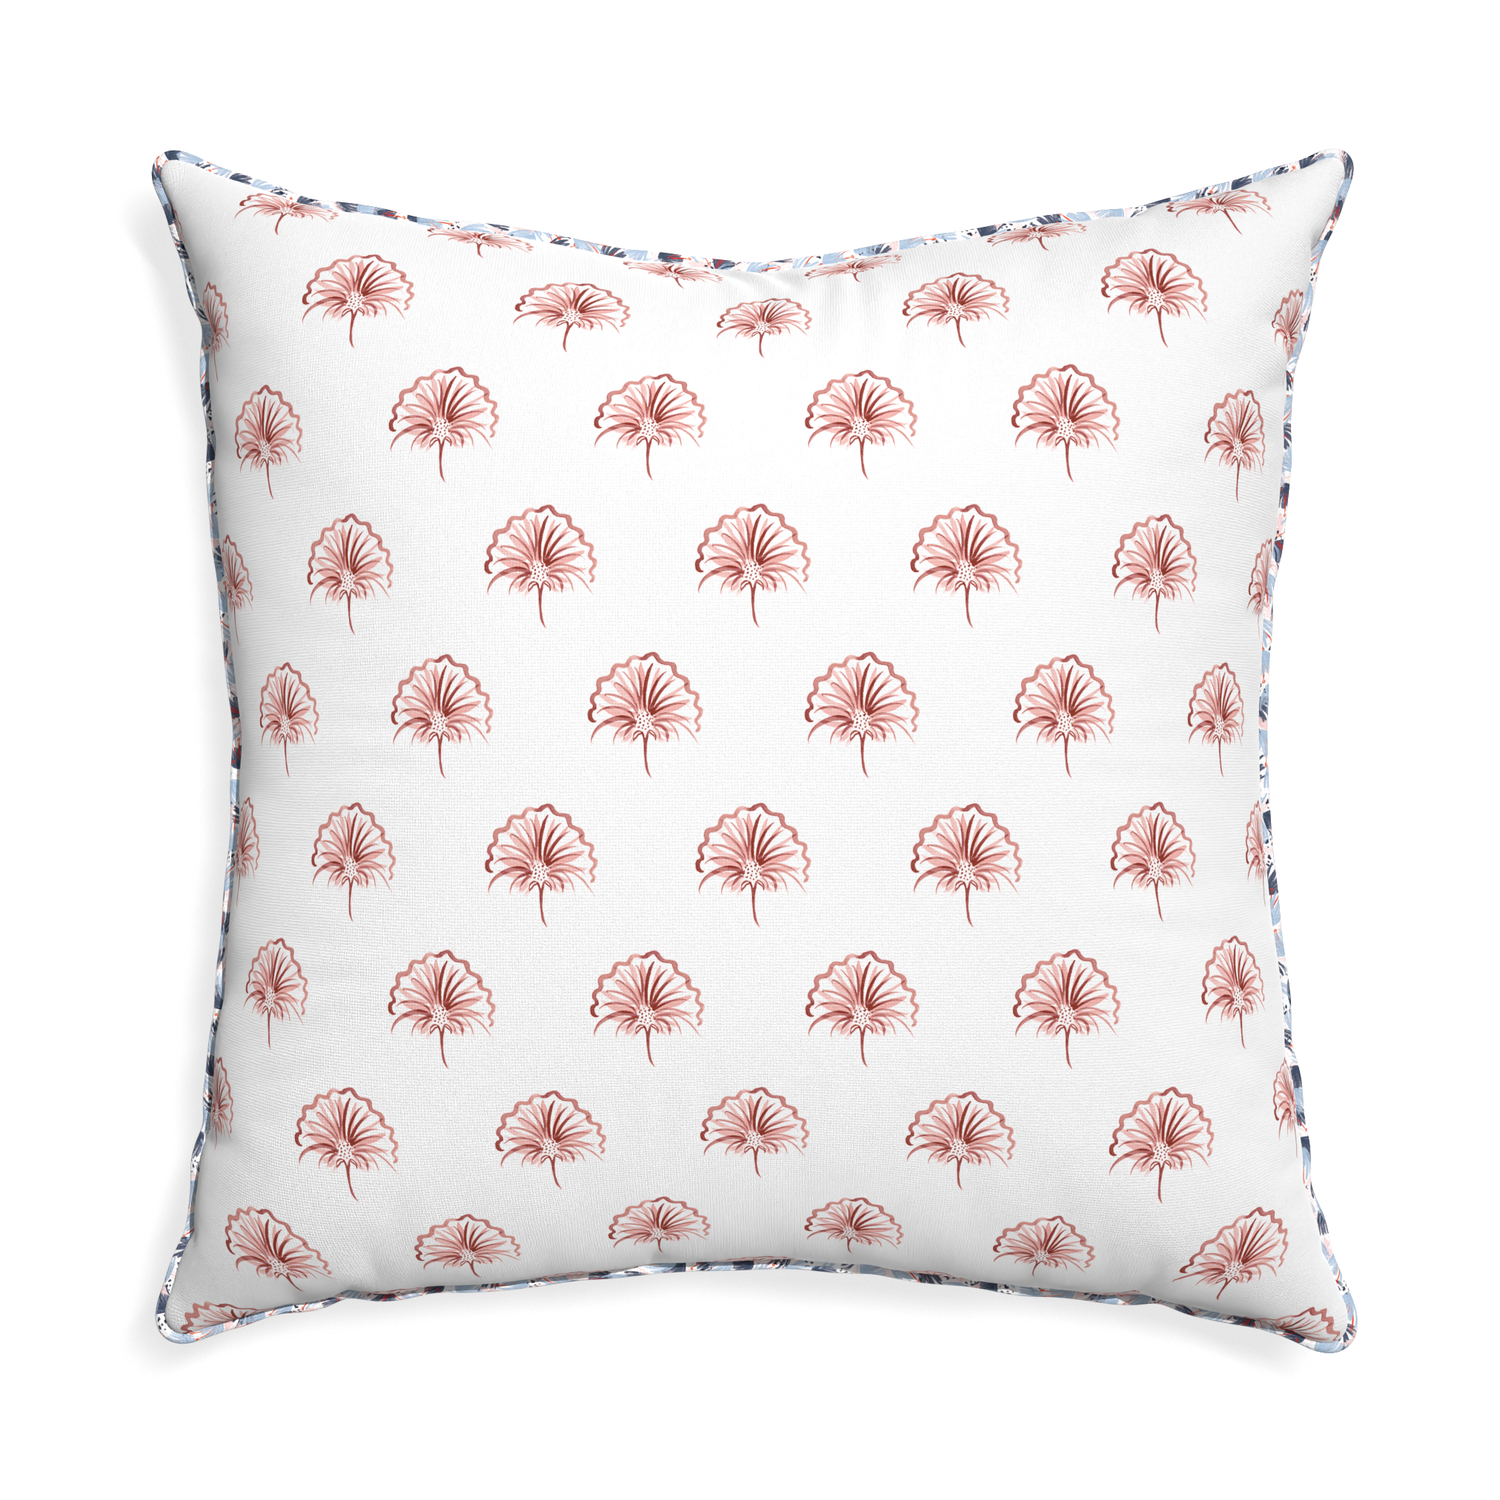 Euro-sham penelope rose custom floral pinkpillow with e piping on white background